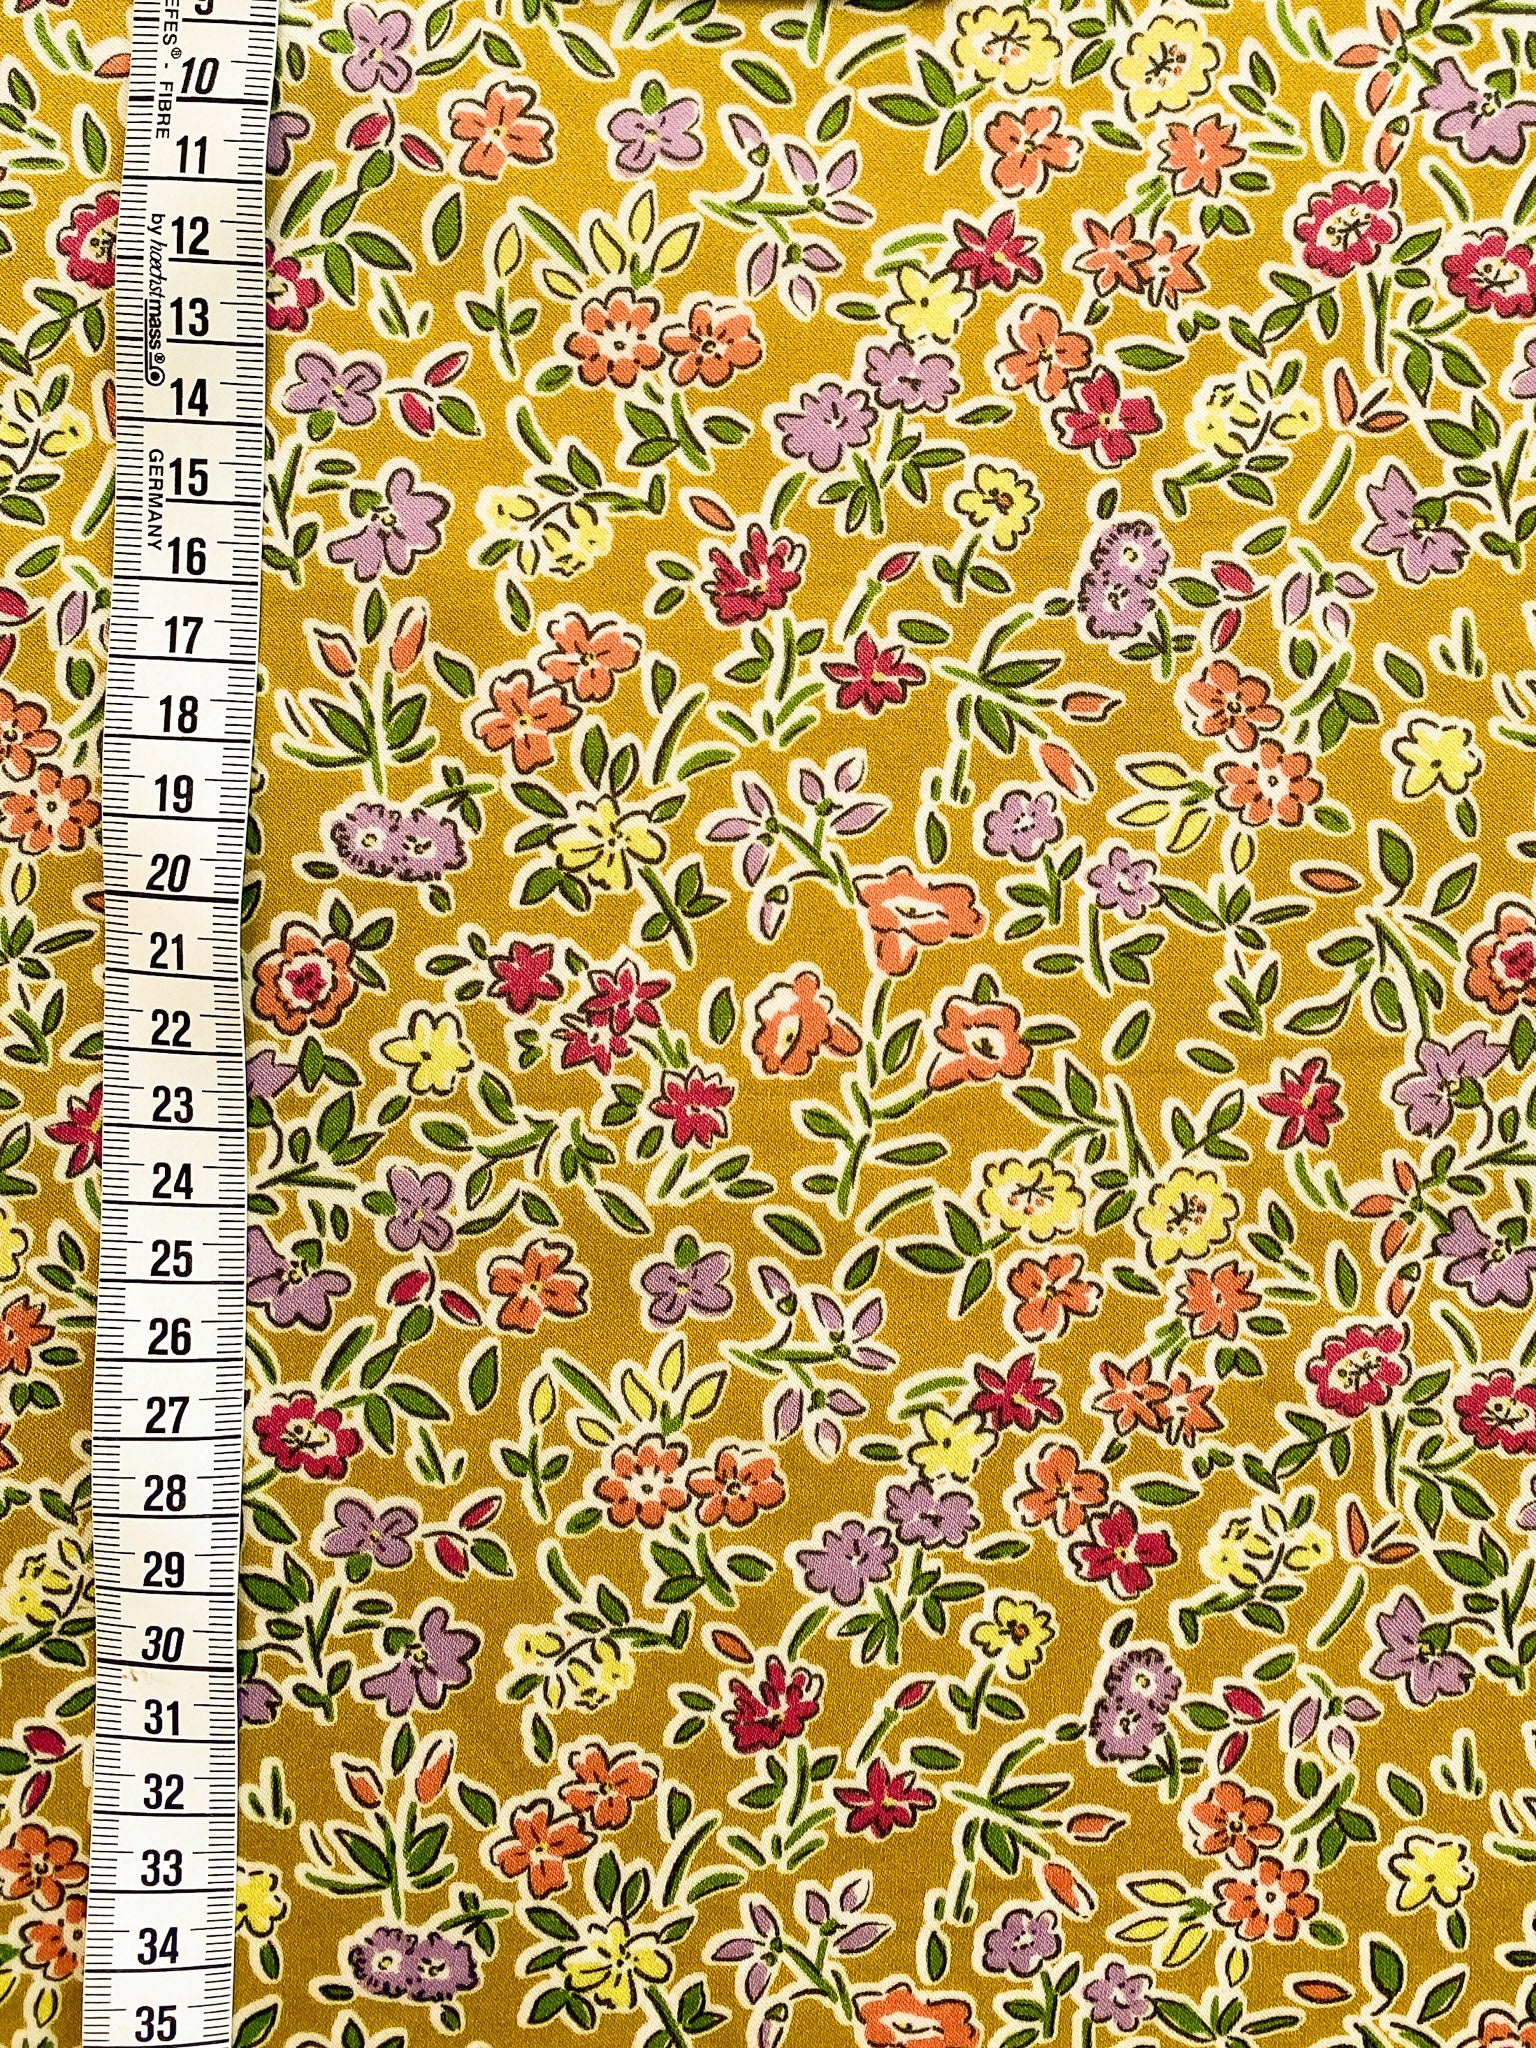 No. 75 viscose satin scattered flowers yellow